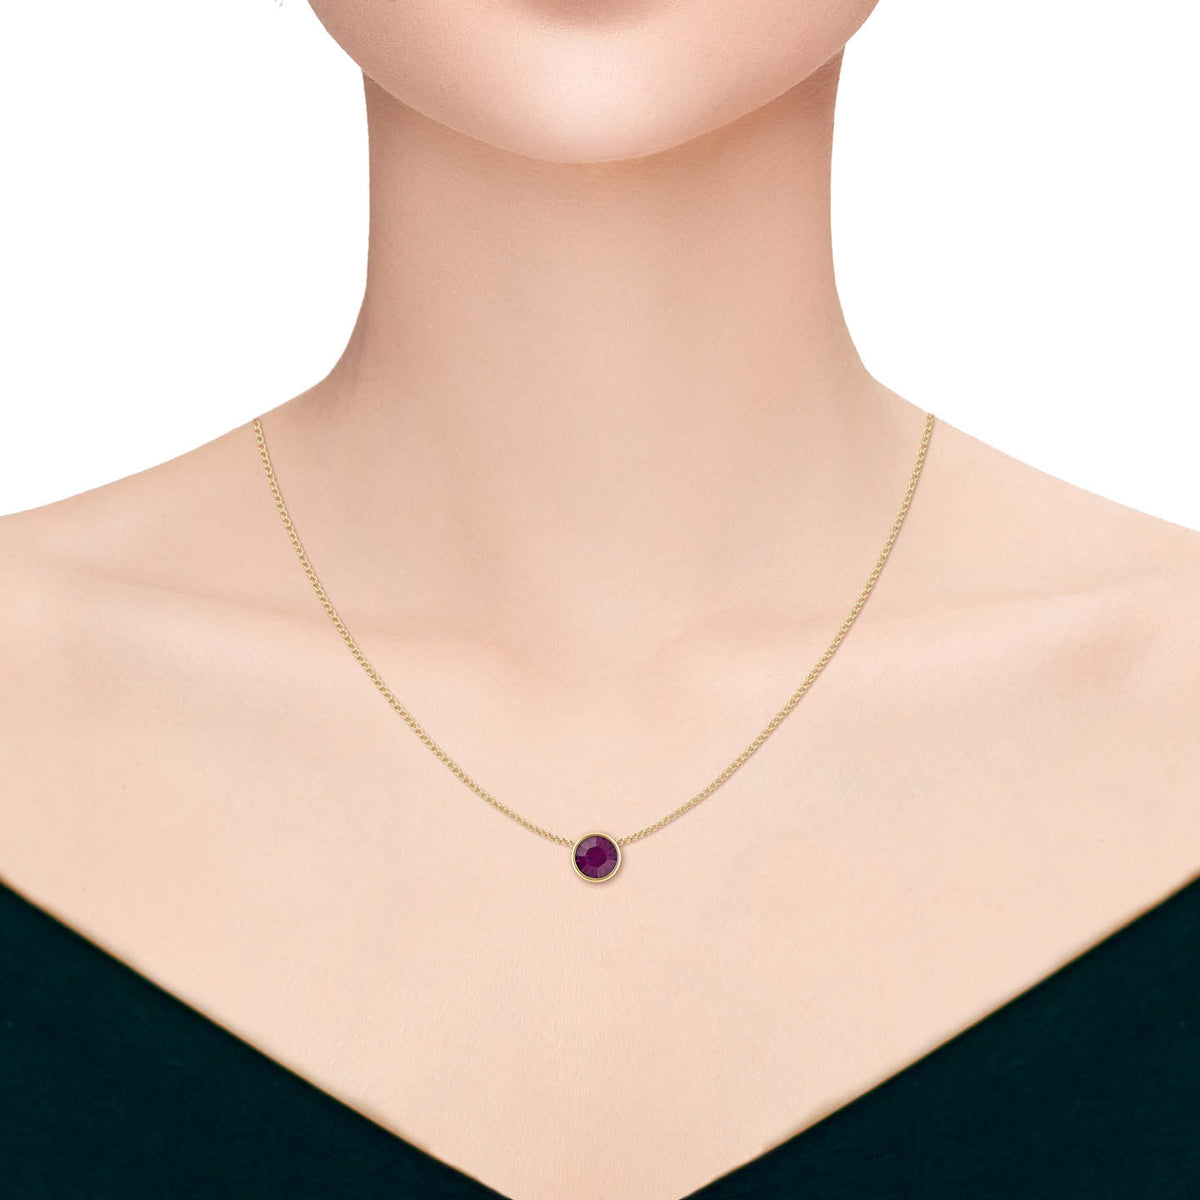 Harley Small Pendant Necklace with Purple Amethyst Round Crystals from Swarovski Gold Plated - Ed Heart